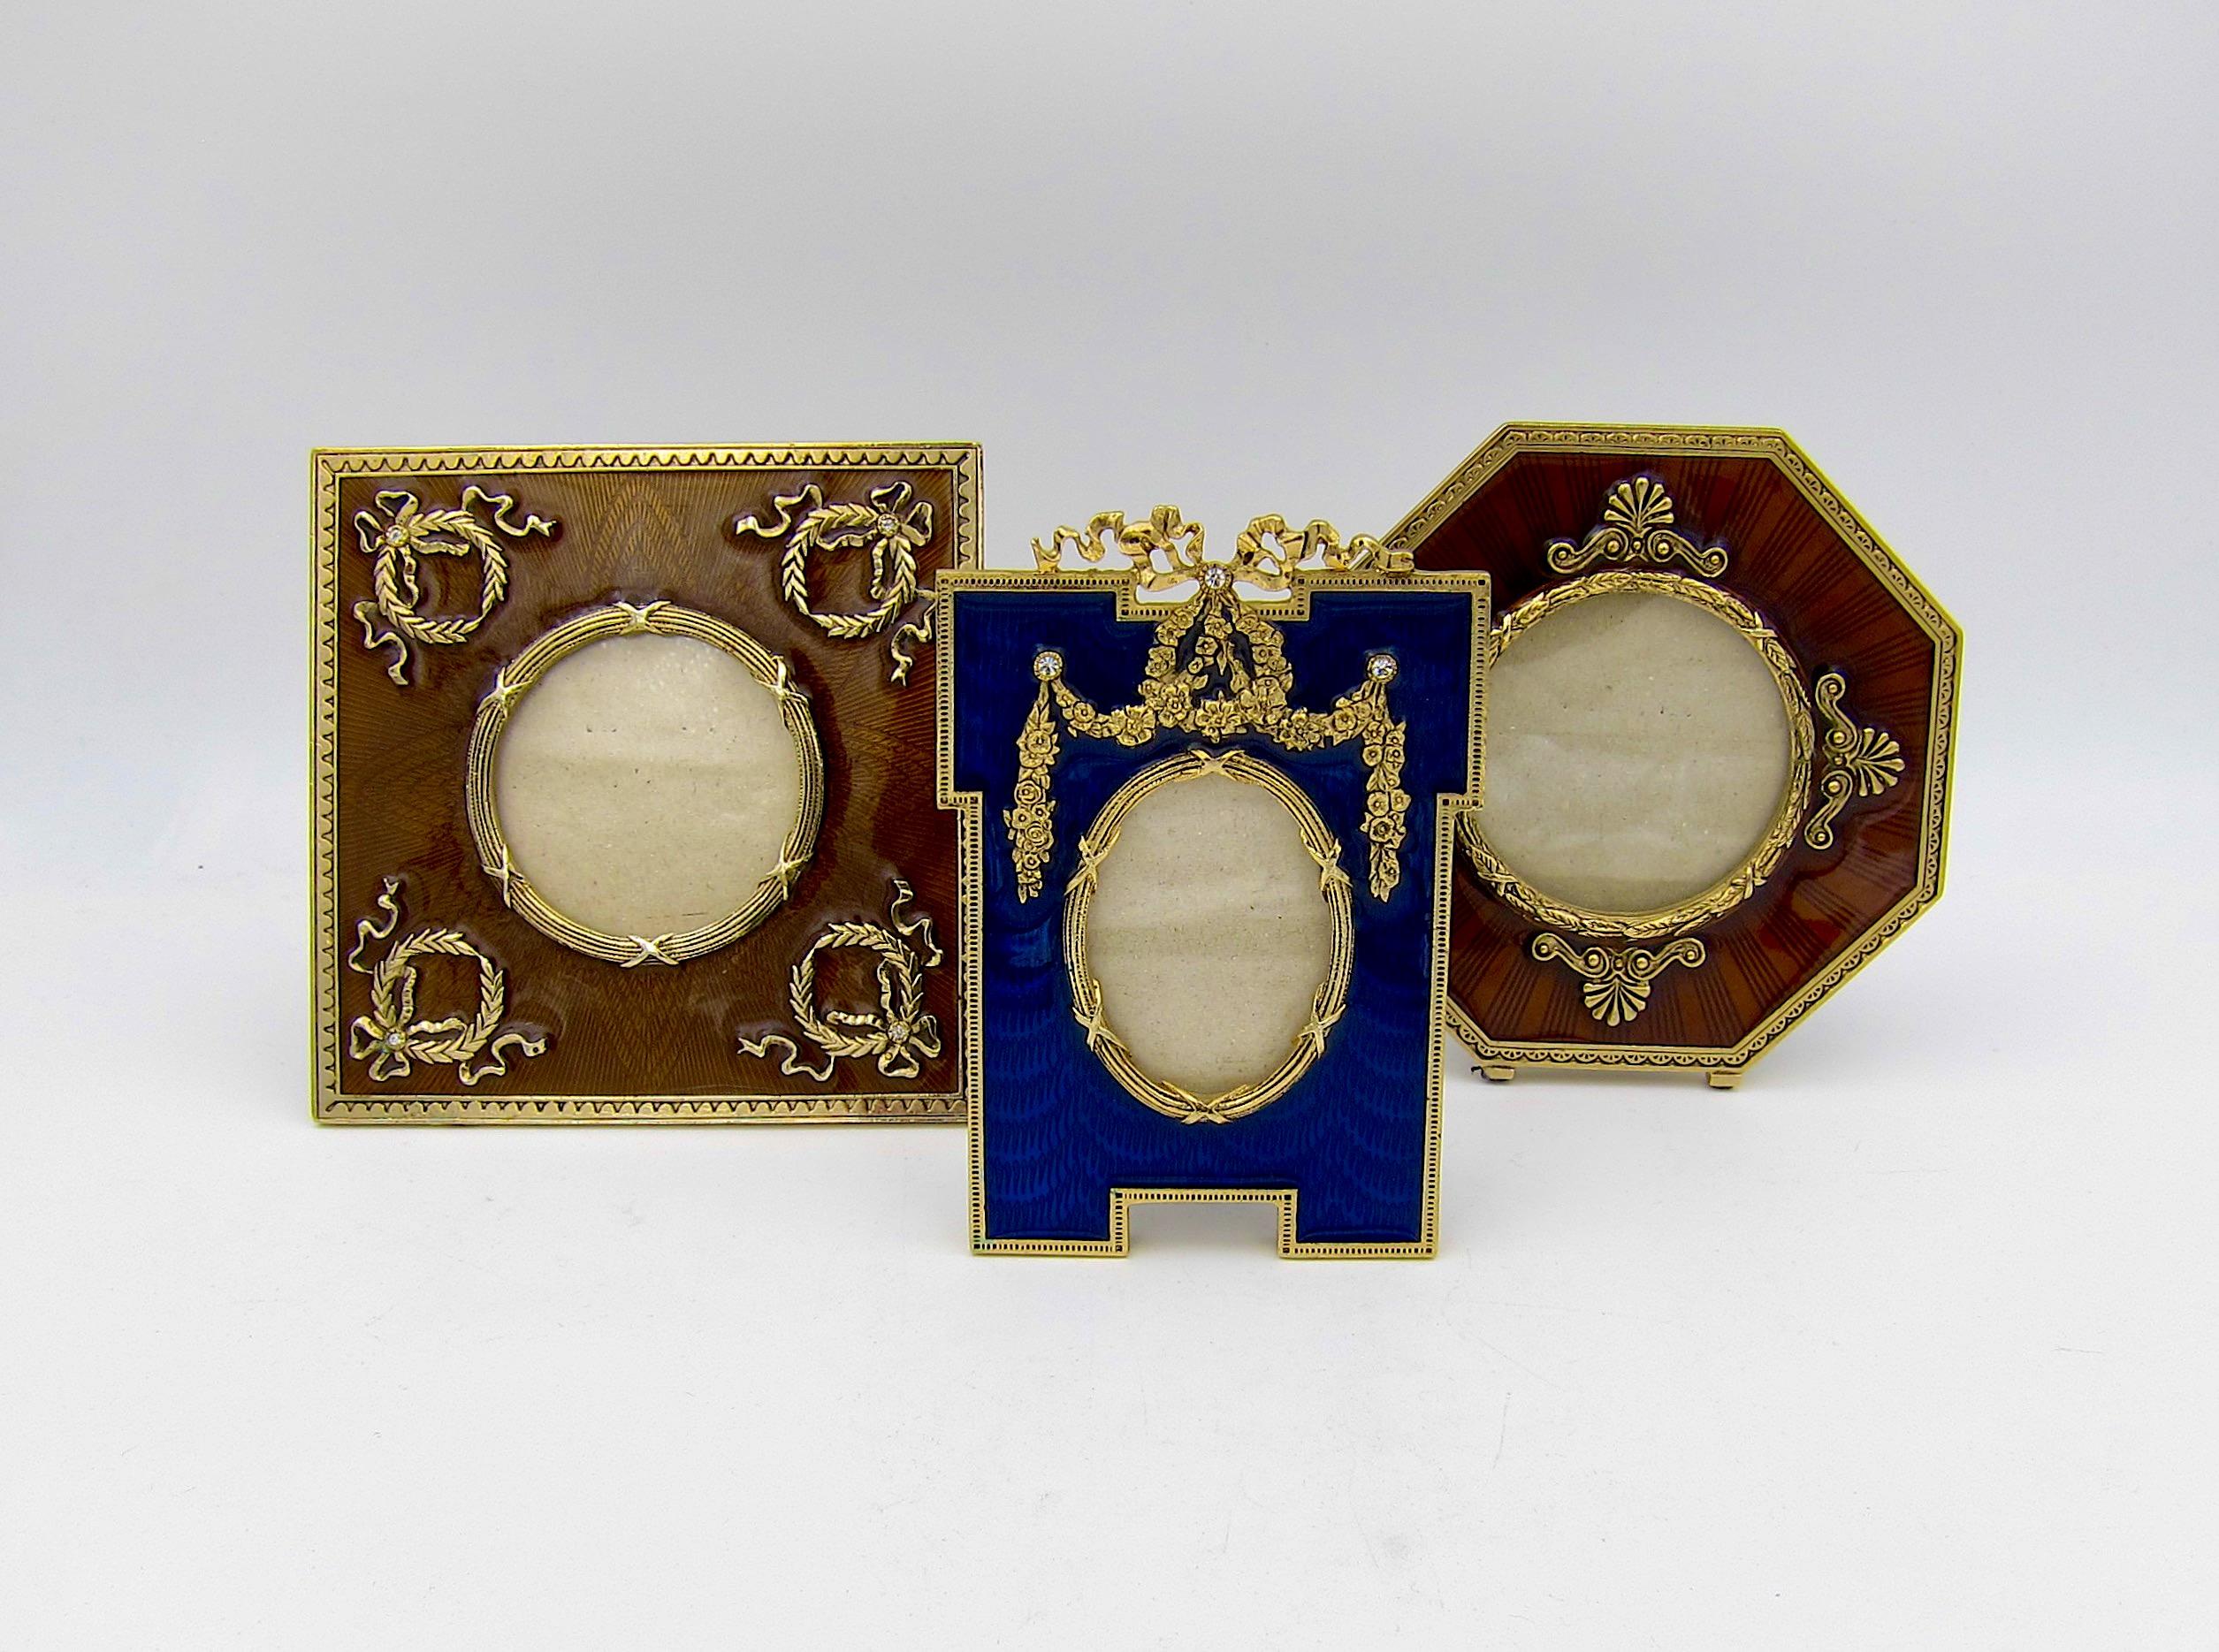 A vintage collection of three small ornamental picture frames decorated with jewel-toned enamel, neoclassical motifs, and faceted crystals. These tabletop photo frames of cast gold-colored metal are of substantial weight with easel backs and fields